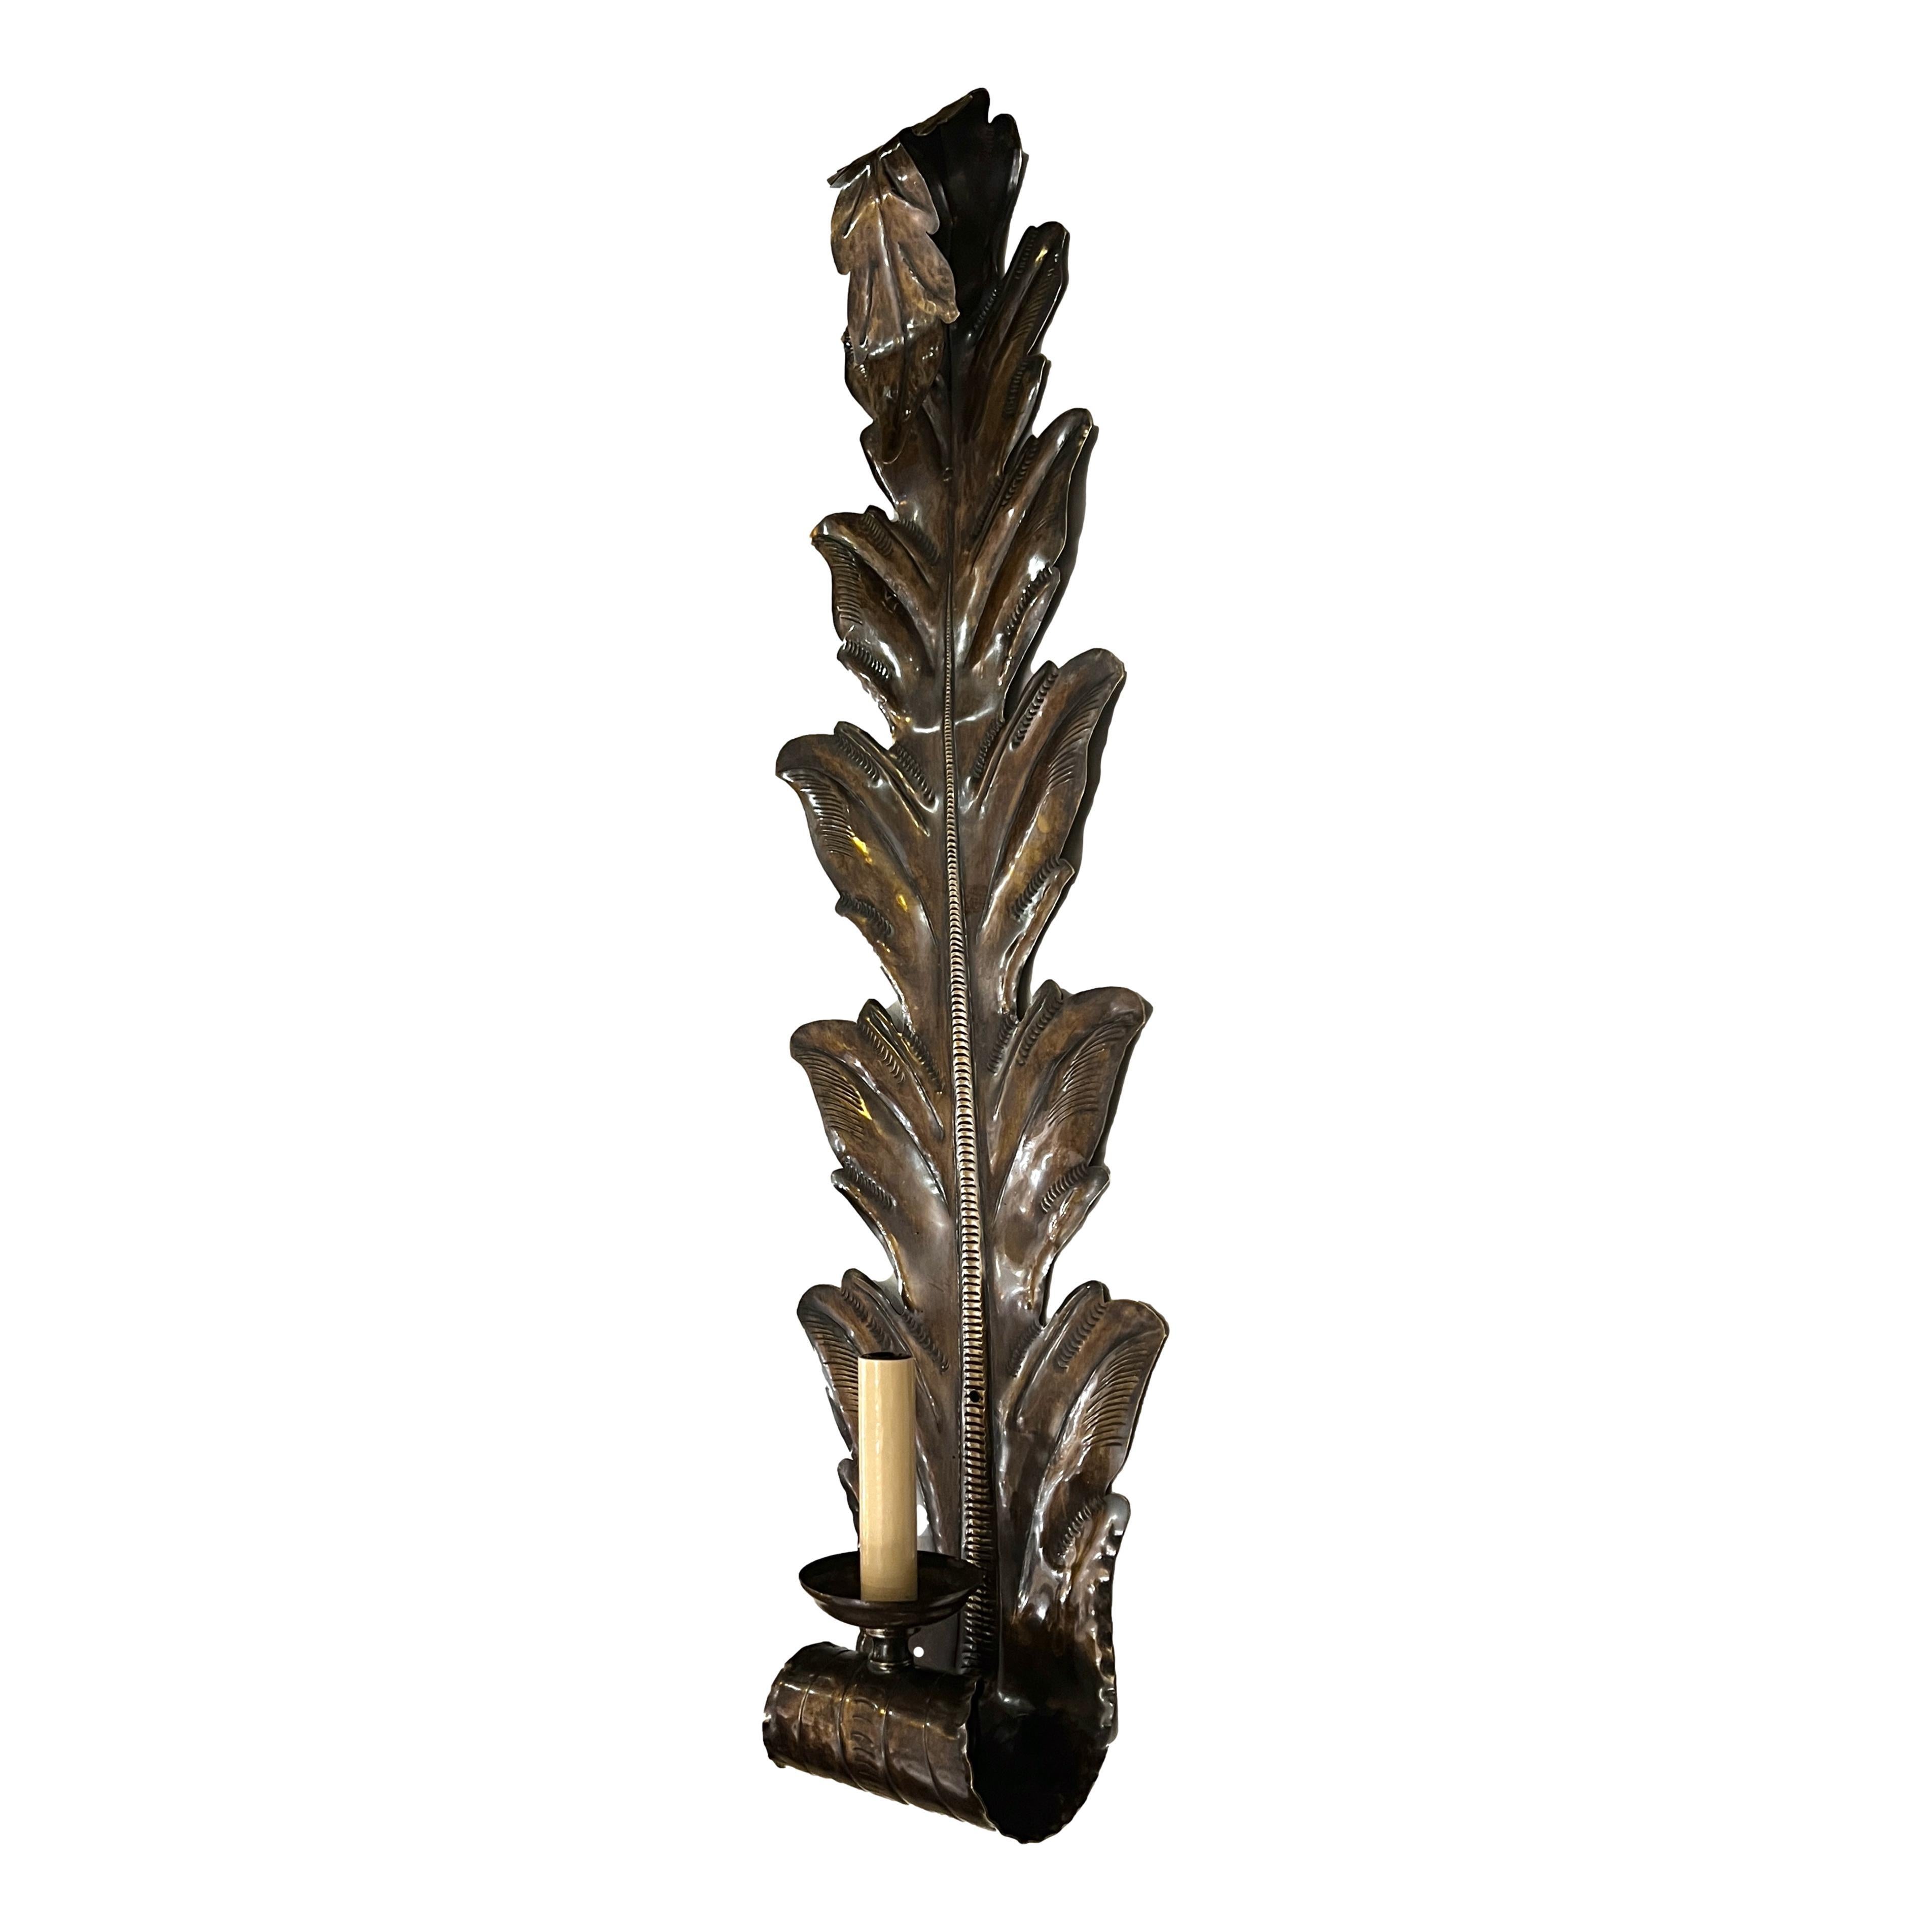 Set of six large Italian circa 1940's repousse' hammered brass sconces with single light in acanthus leaf motif. Sold per pair.

Measurements:
Height: 28